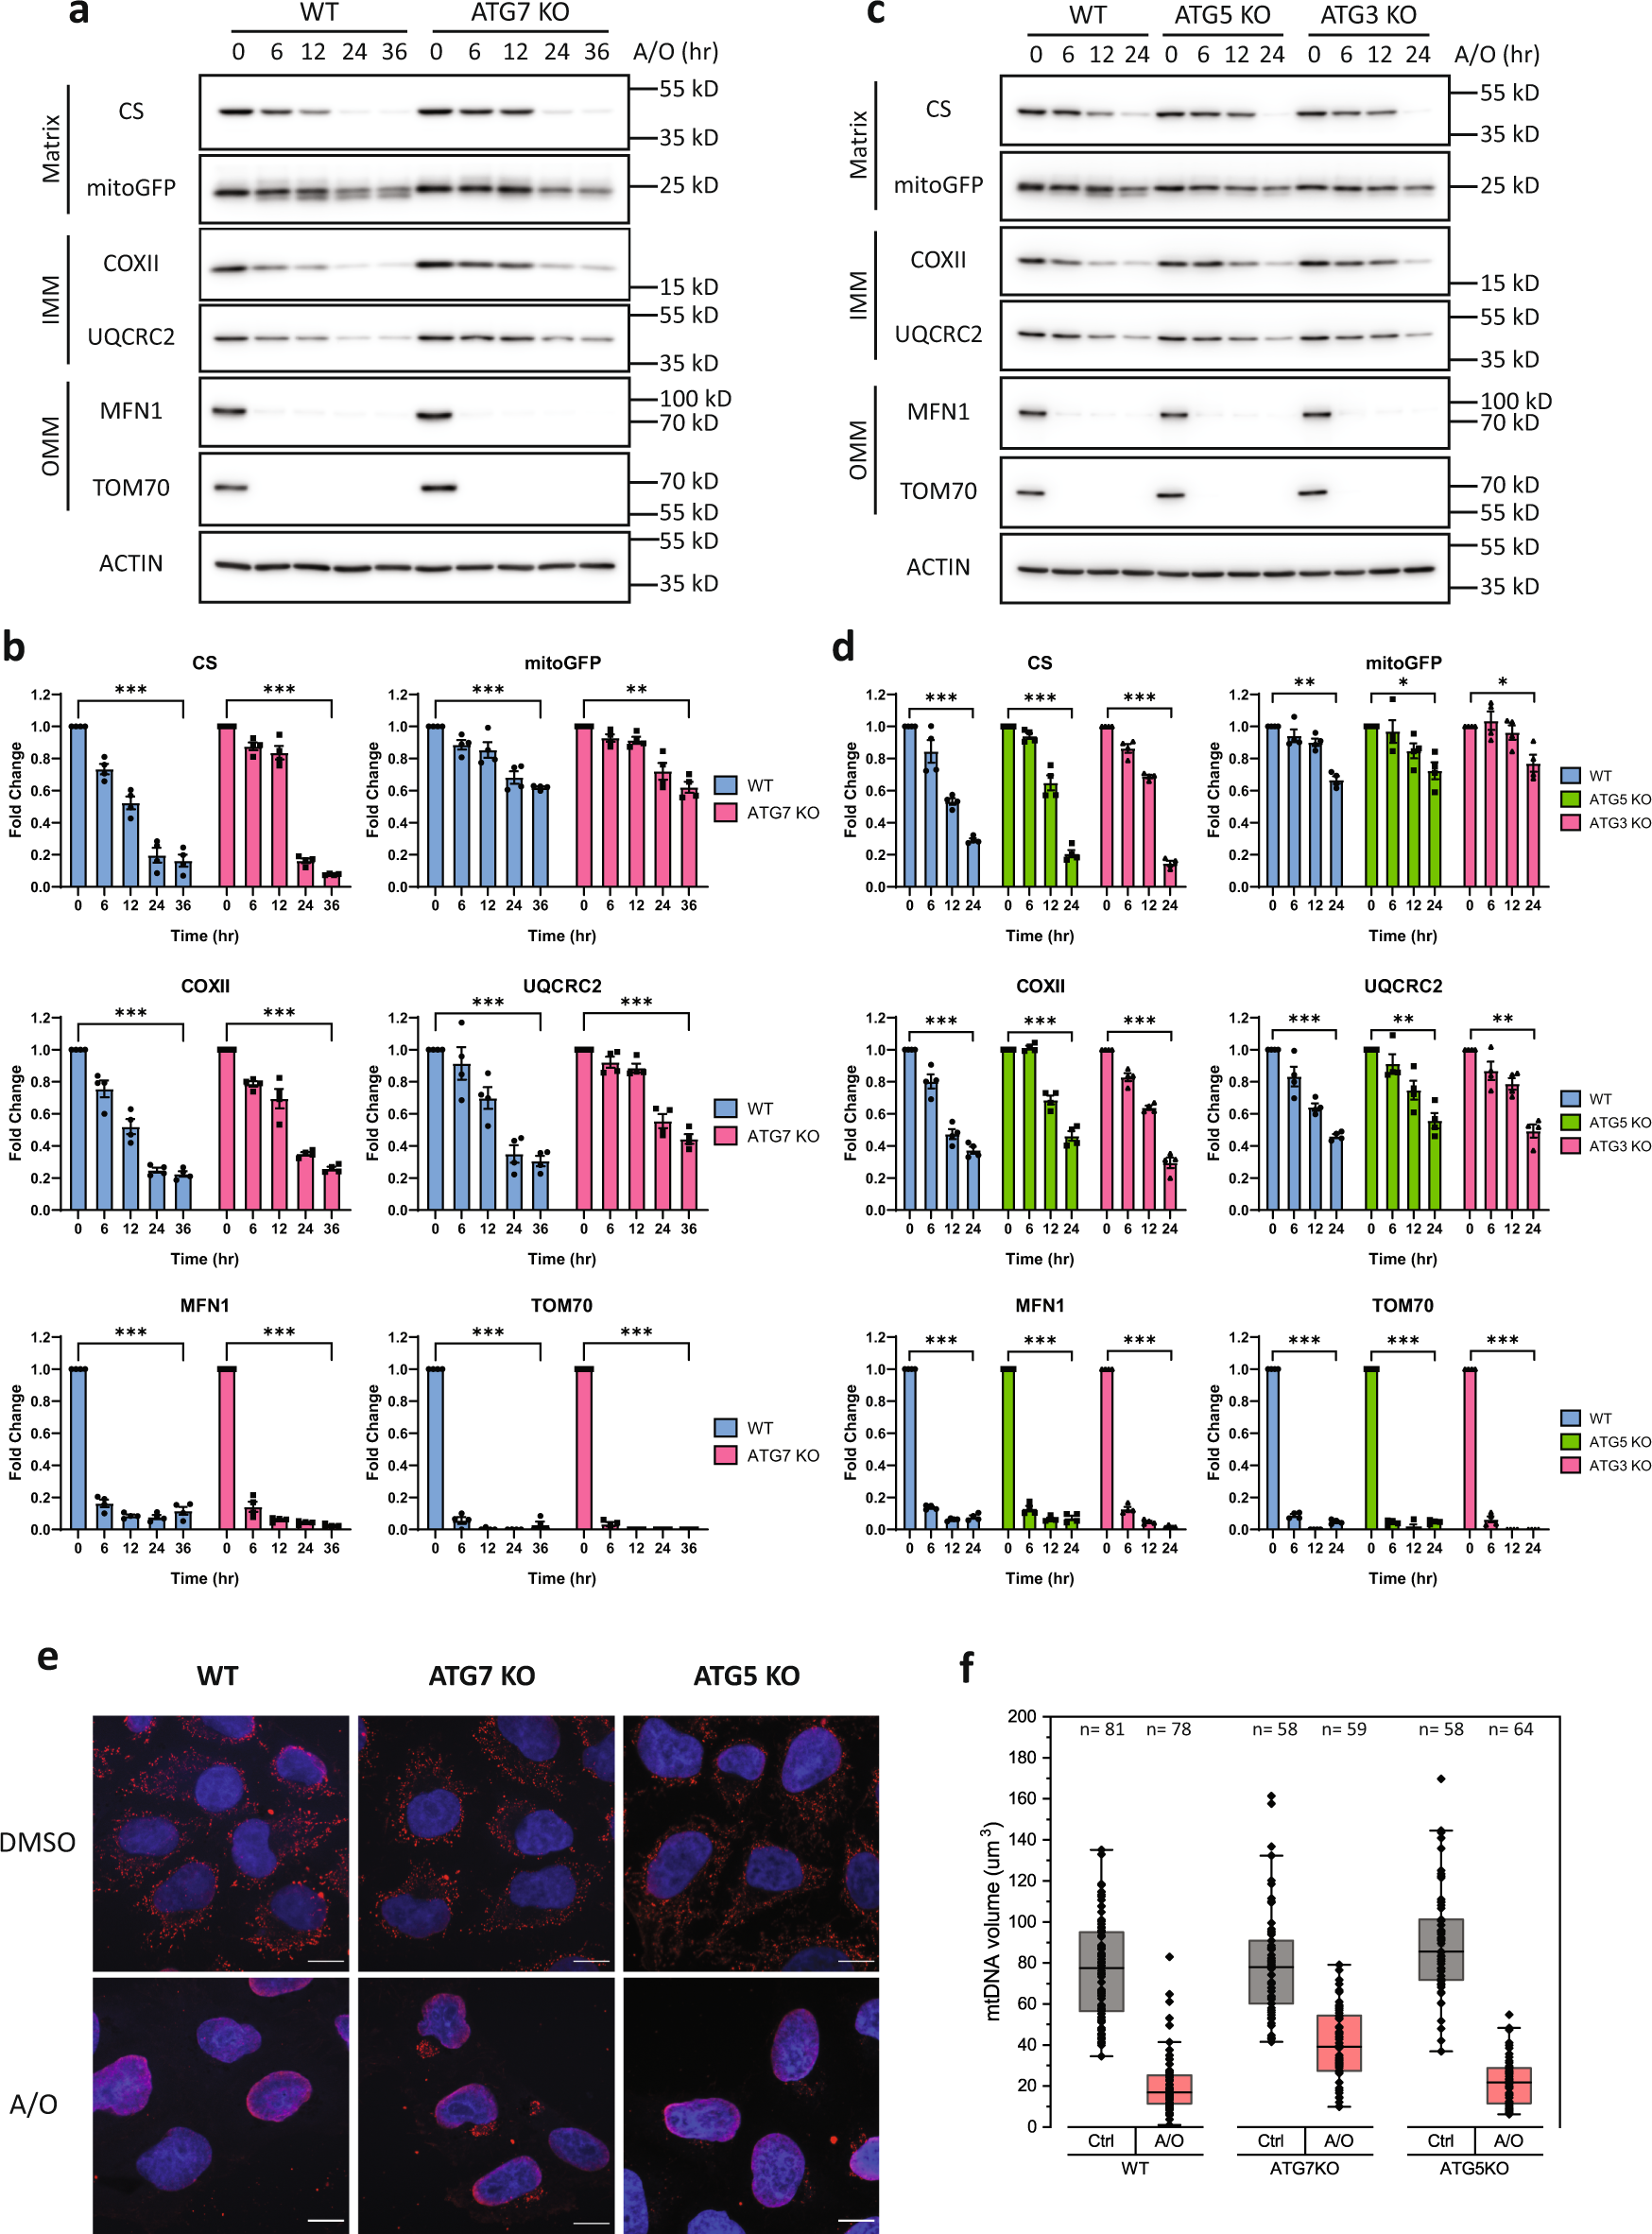 A degradative to secretory autophagy switch mediates mitochondria clearance  in the absence of the mATG8-conjugation machinery | Nature Communications